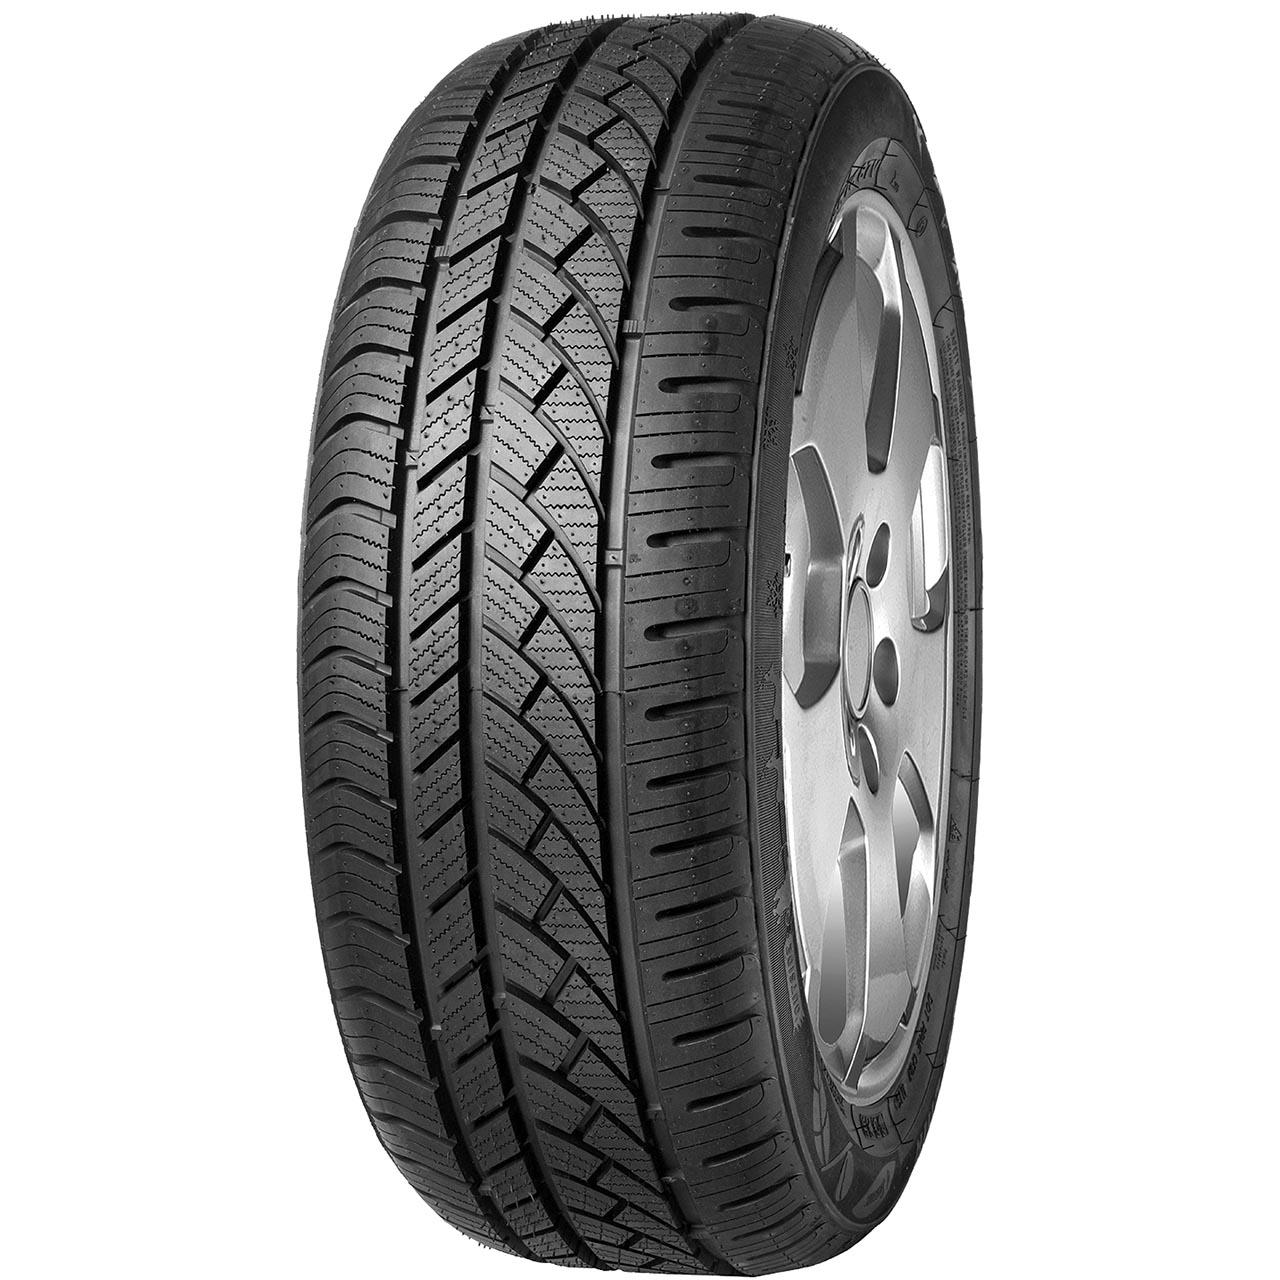 Imperial Ecodriver 4S 165/60R15 81T XL